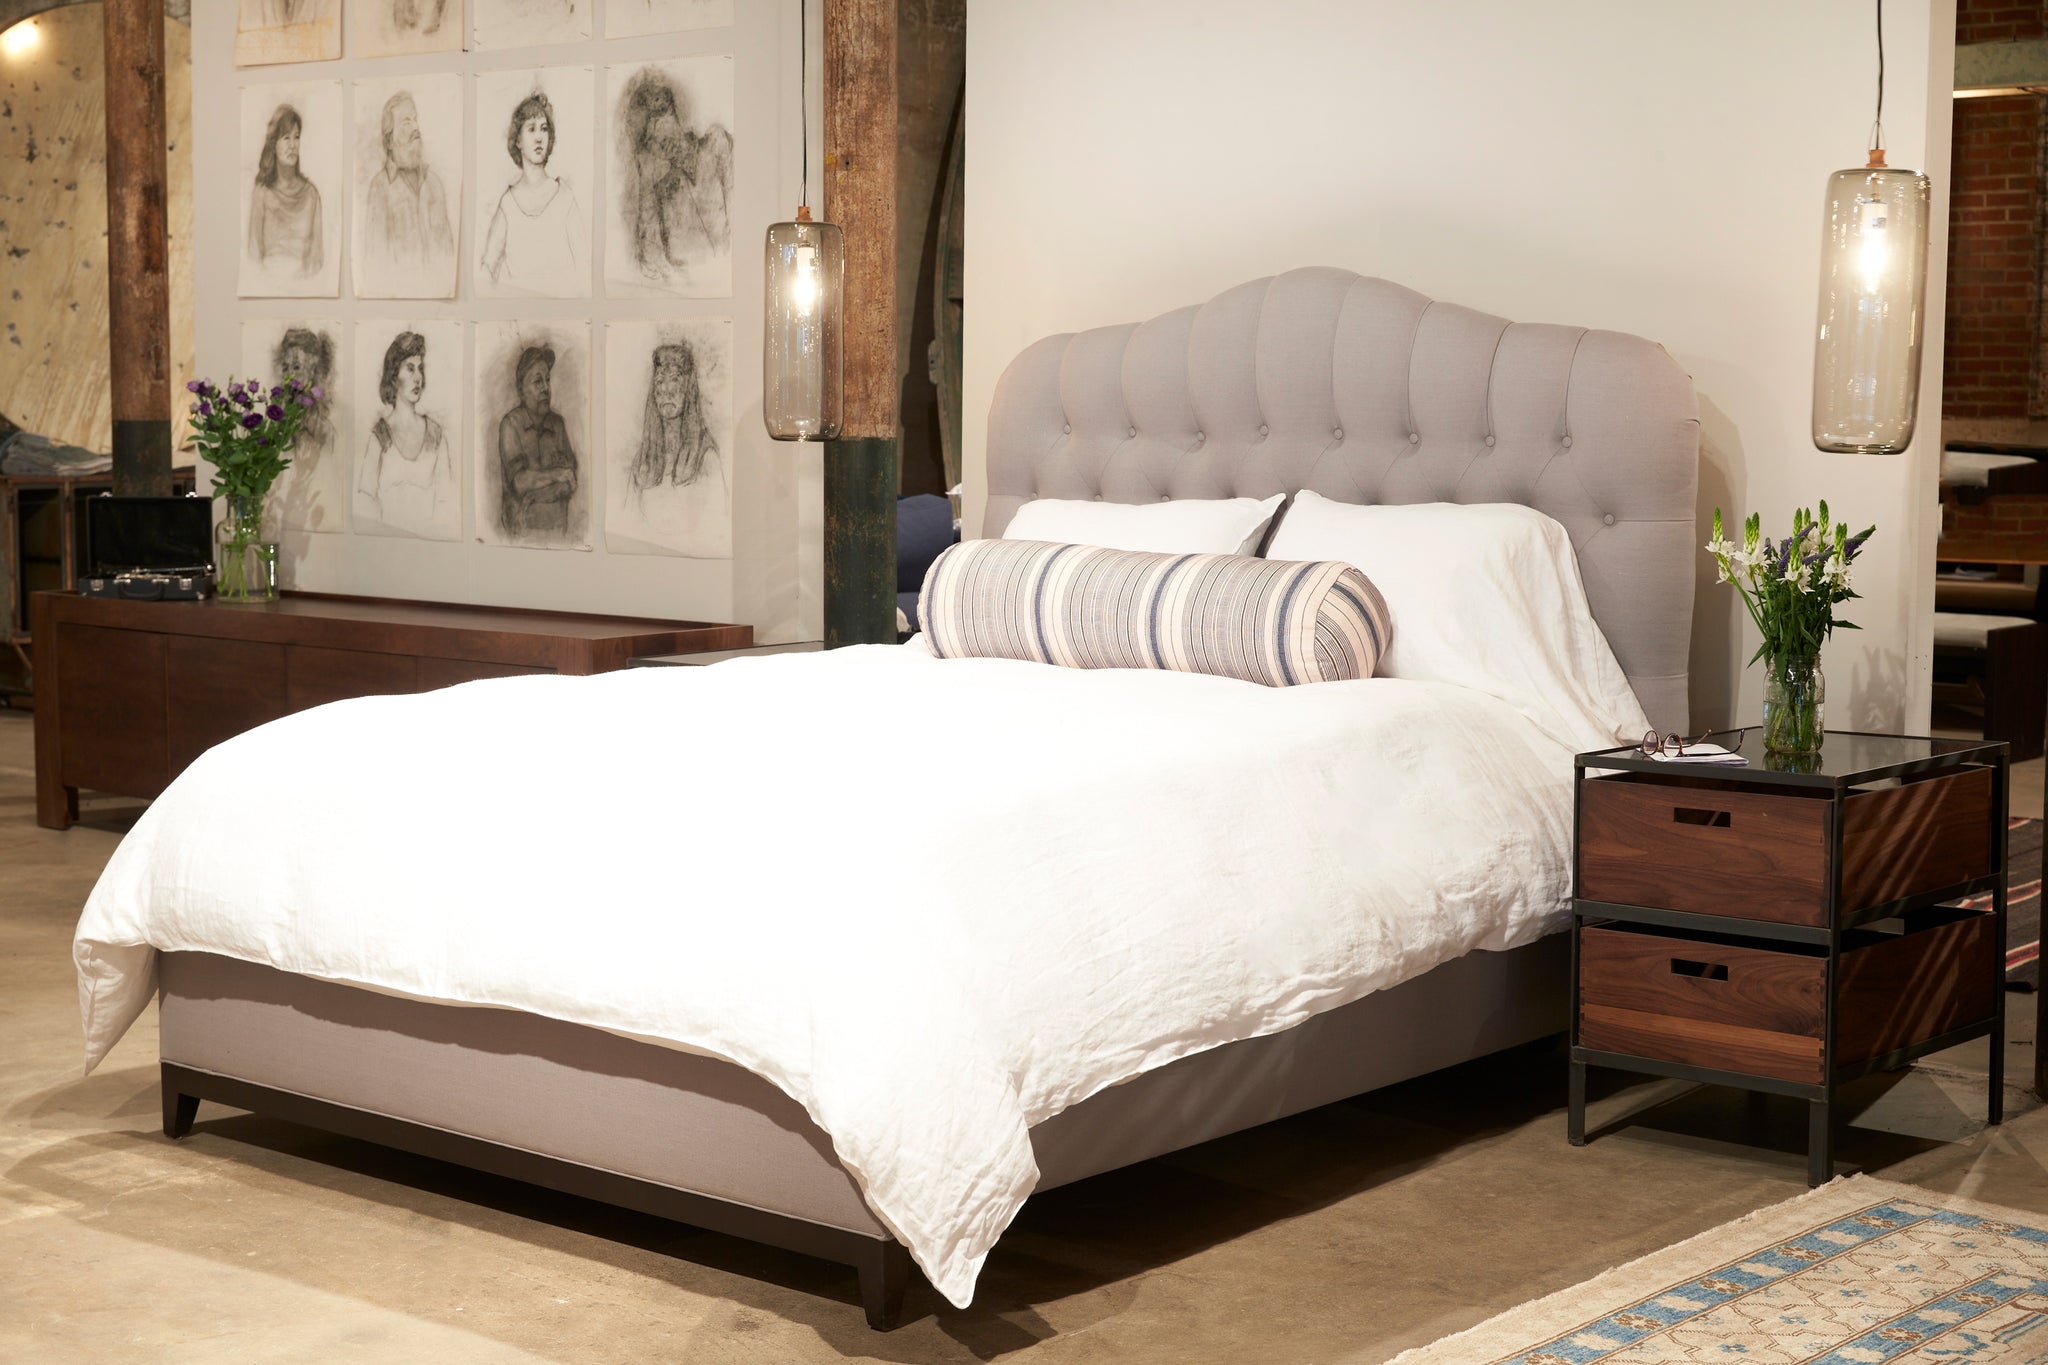  Tufted upholstered bed in a light grey fabric with white bedding and an accent pillow in striped fabric. Bed has a wood nightstand with glass top and there are two cylinder pendants hanging on either side of the bed in smoke finish.  